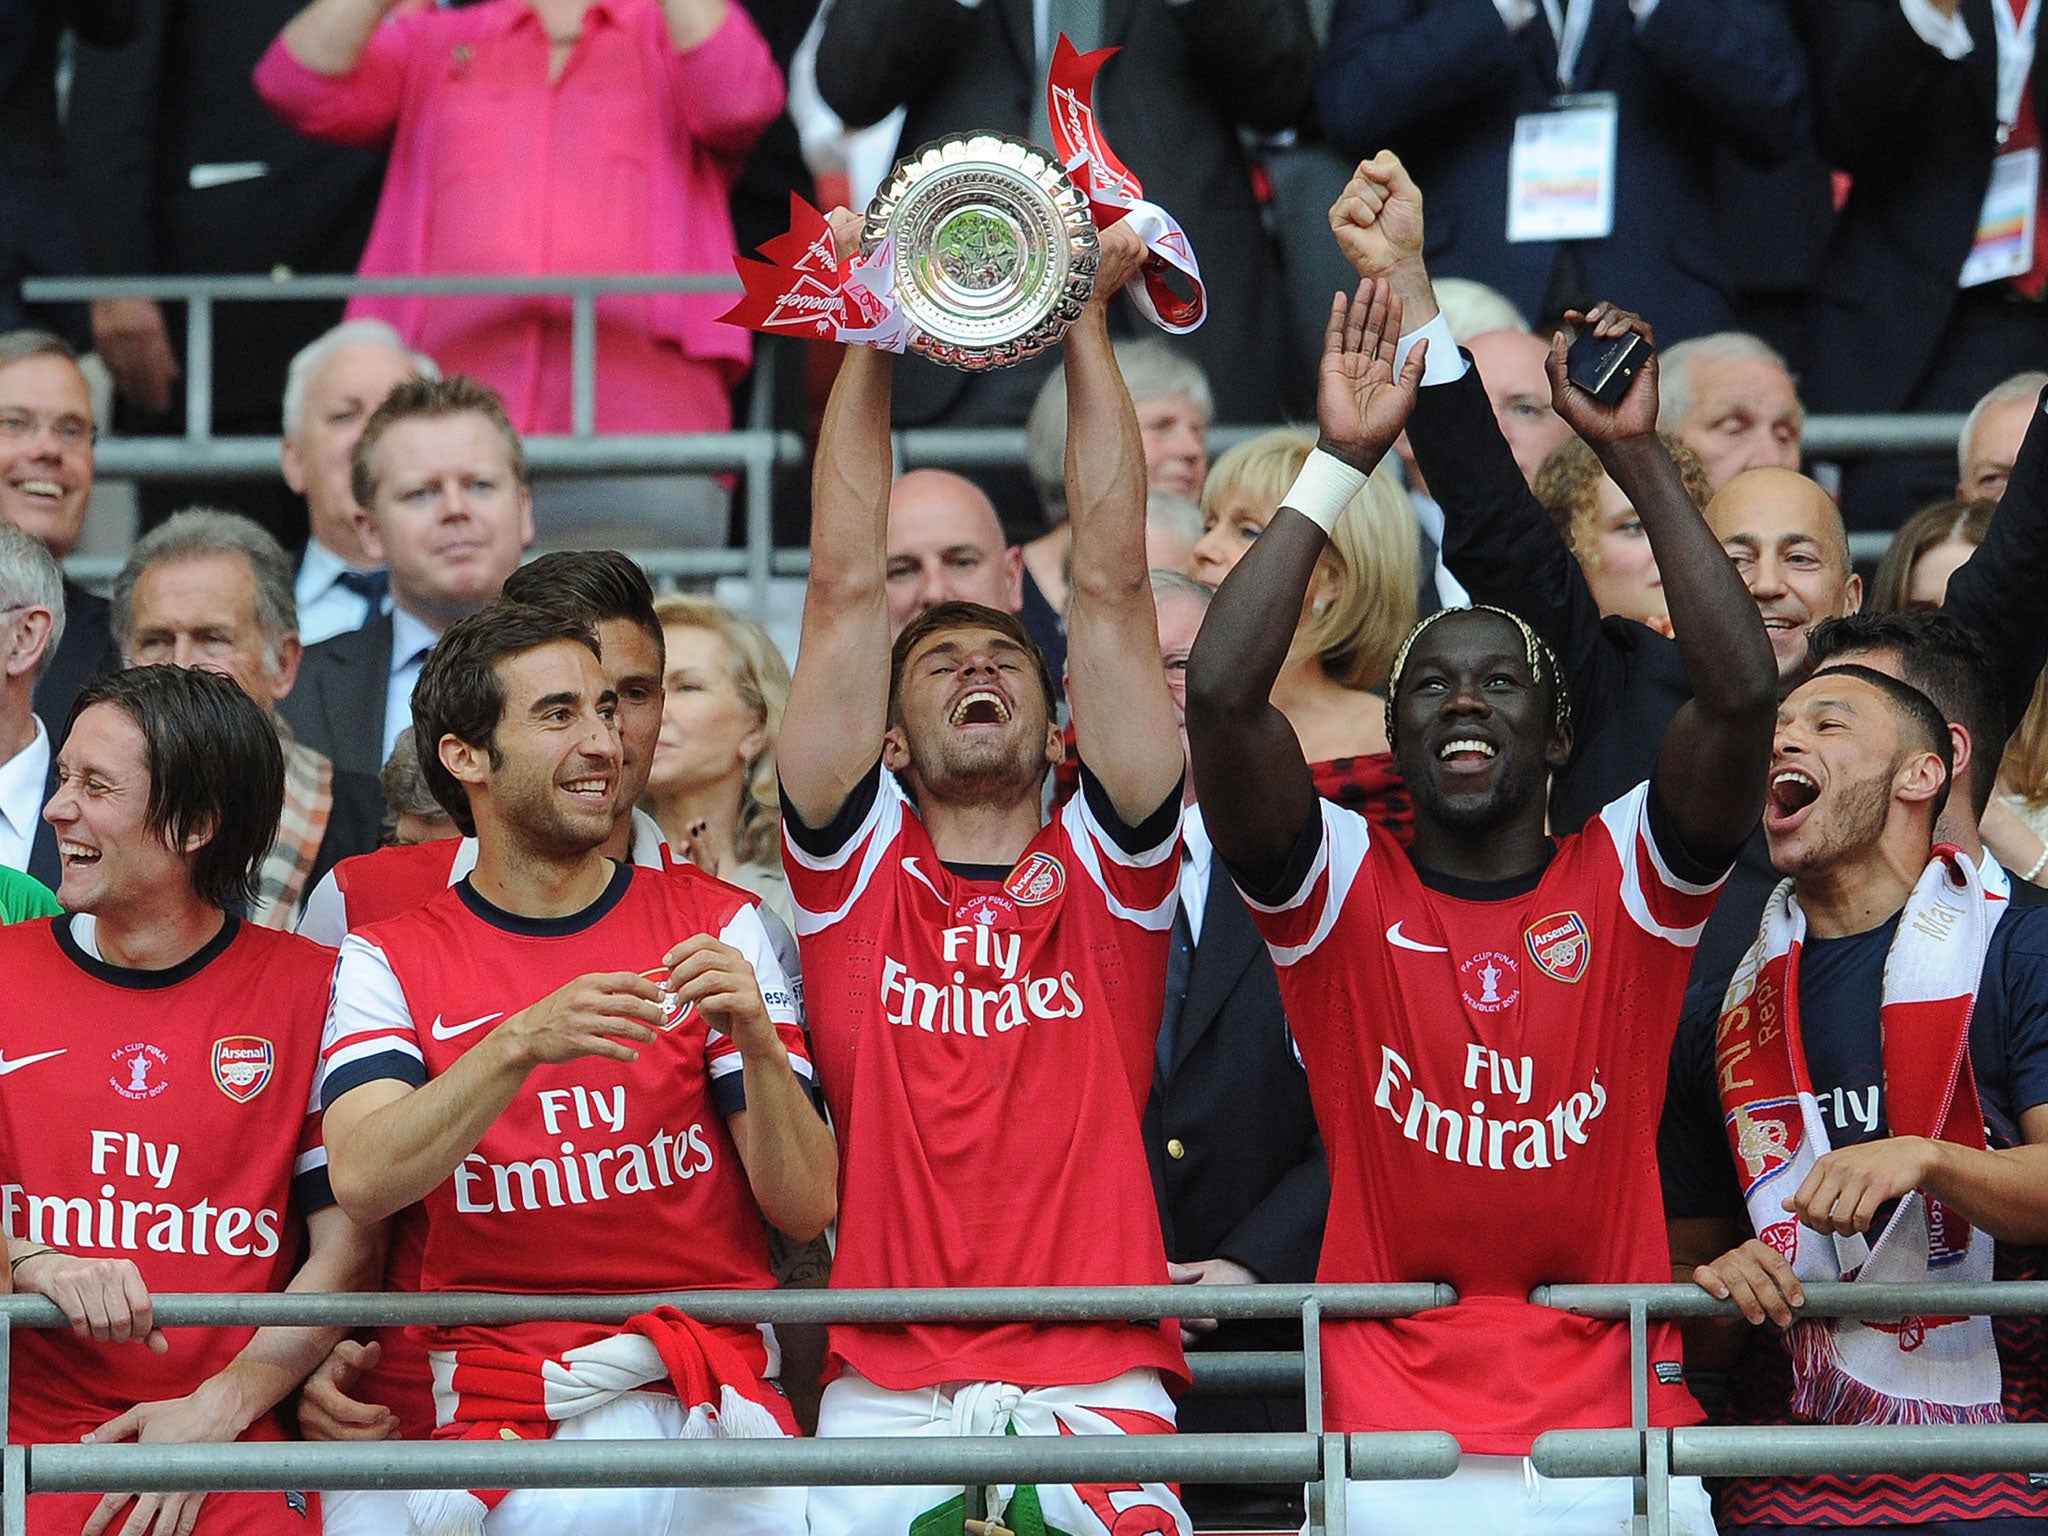 Arsenal face Hull in a repeat of last season's final